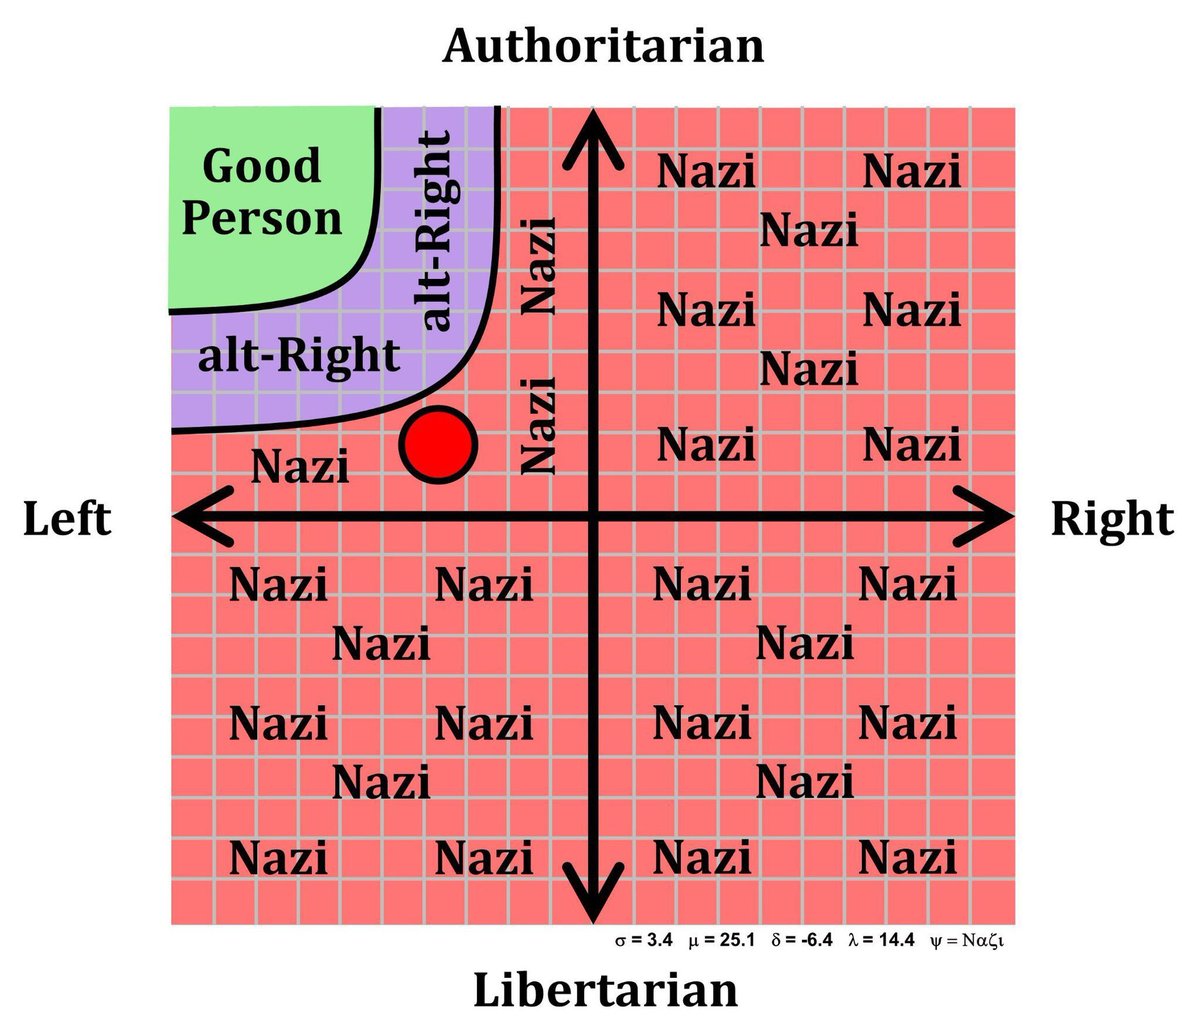 How Woke Twitter users view the political spectrum.  

Graphic by @WokeTemple